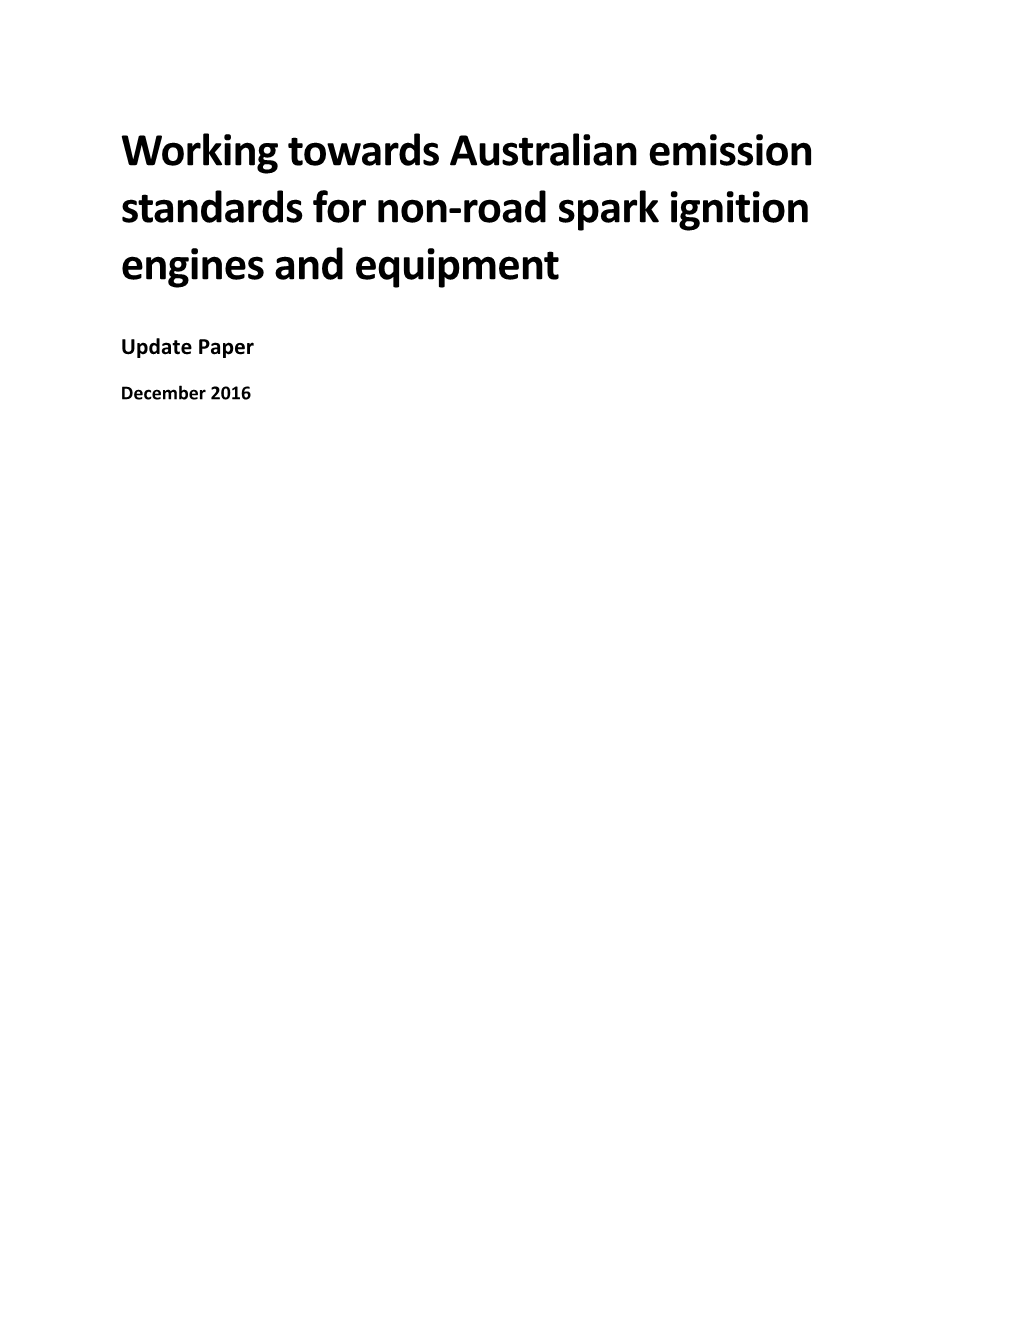 Working Towards Australian Emission Standards for Non-Road Spark Ignition Engines and Equipment